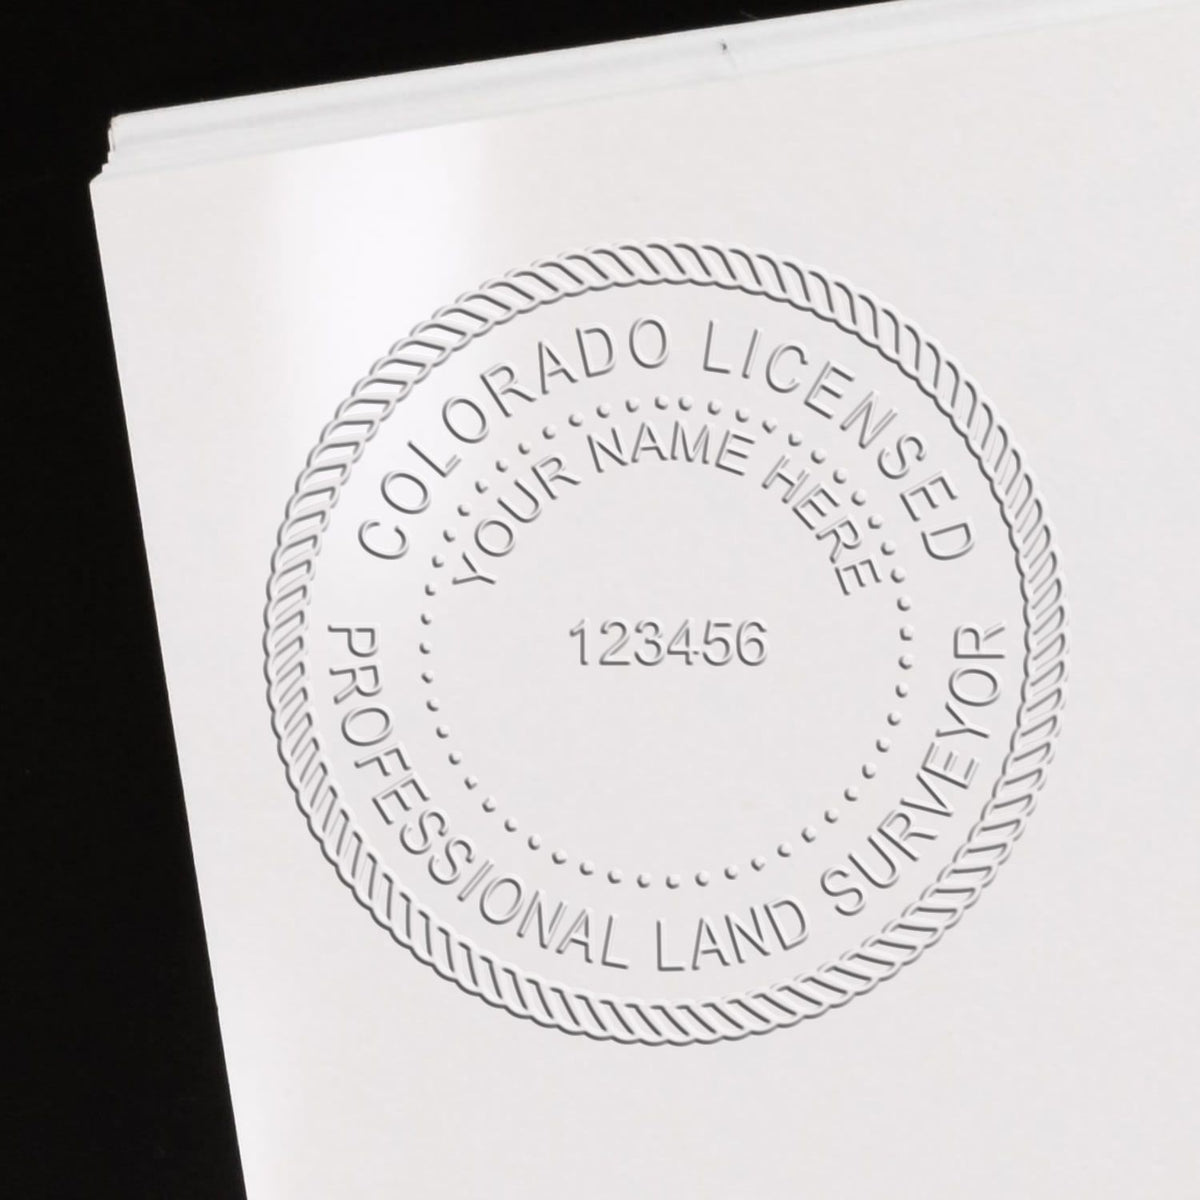 A photograph of the State of Colorado Soft Land Surveyor Embossing Seal stamp impression reveals a vivid, professional image of the on paper.